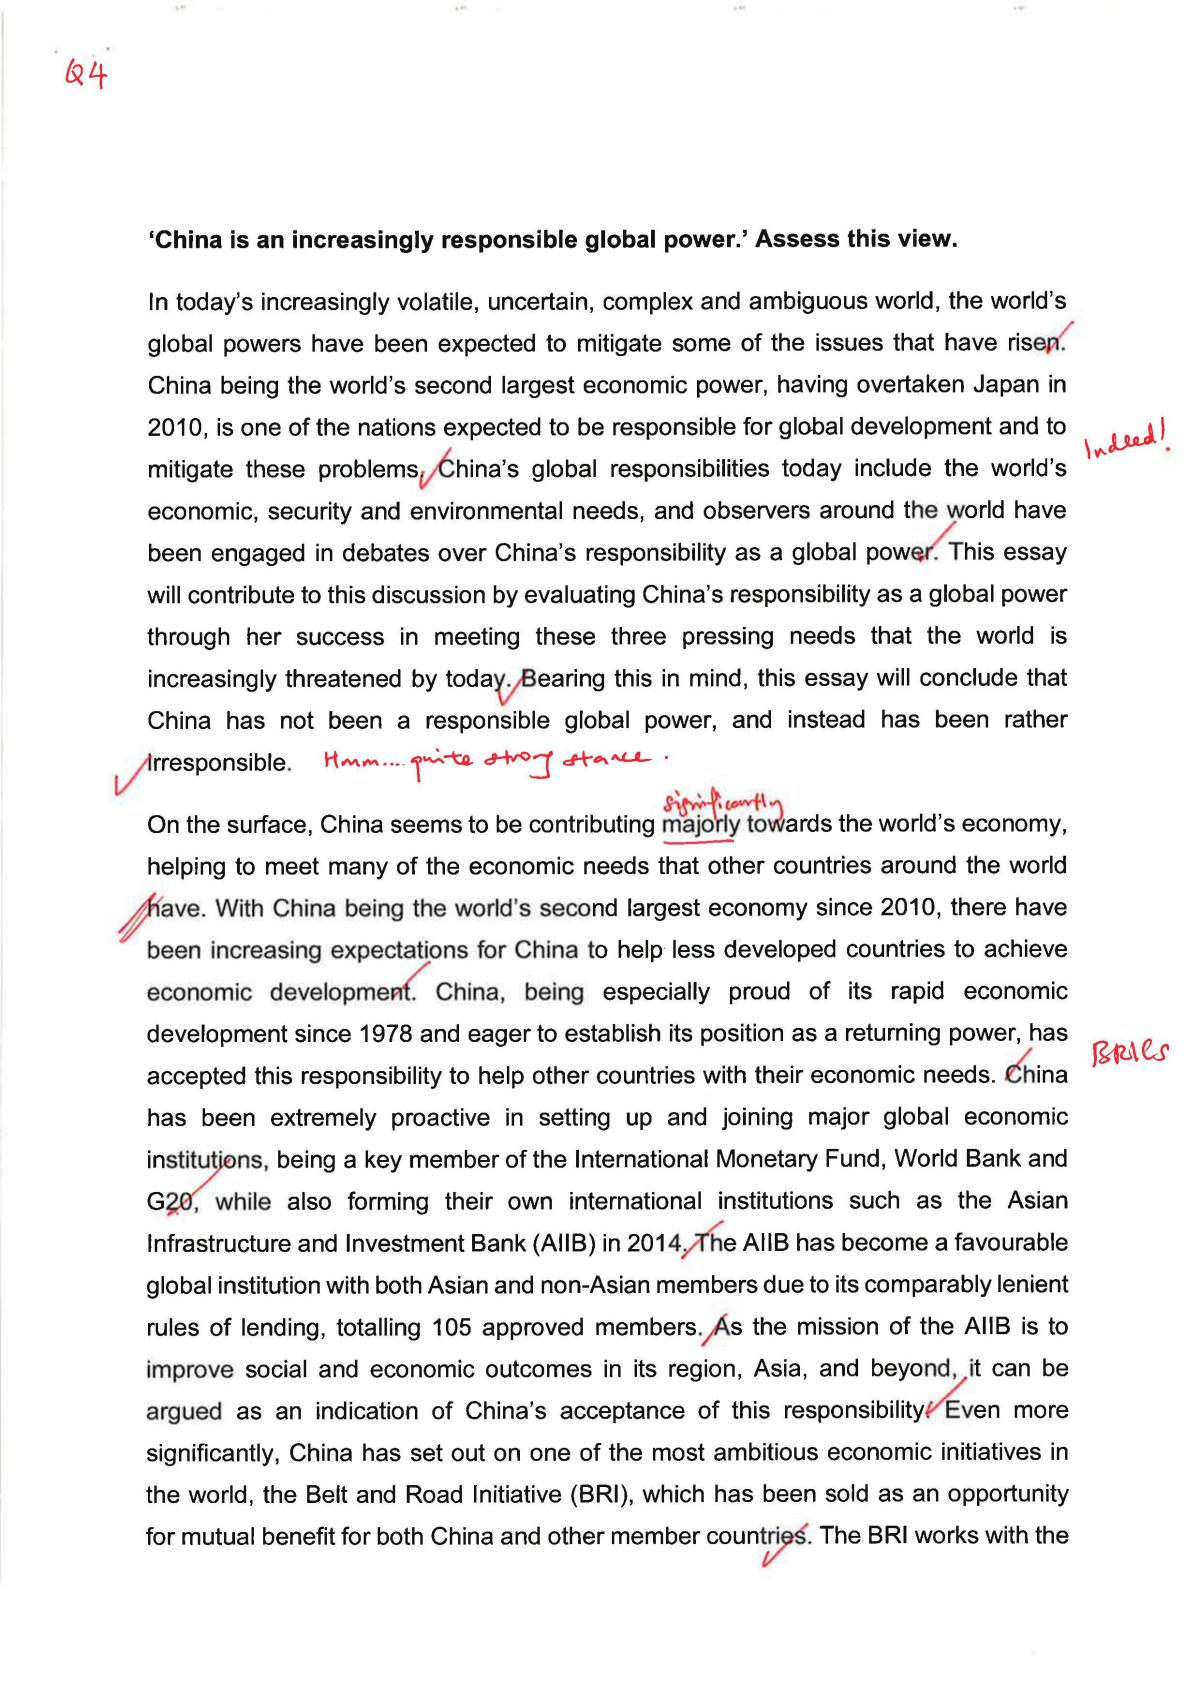 Essay on China's rise as a global power - Page 1